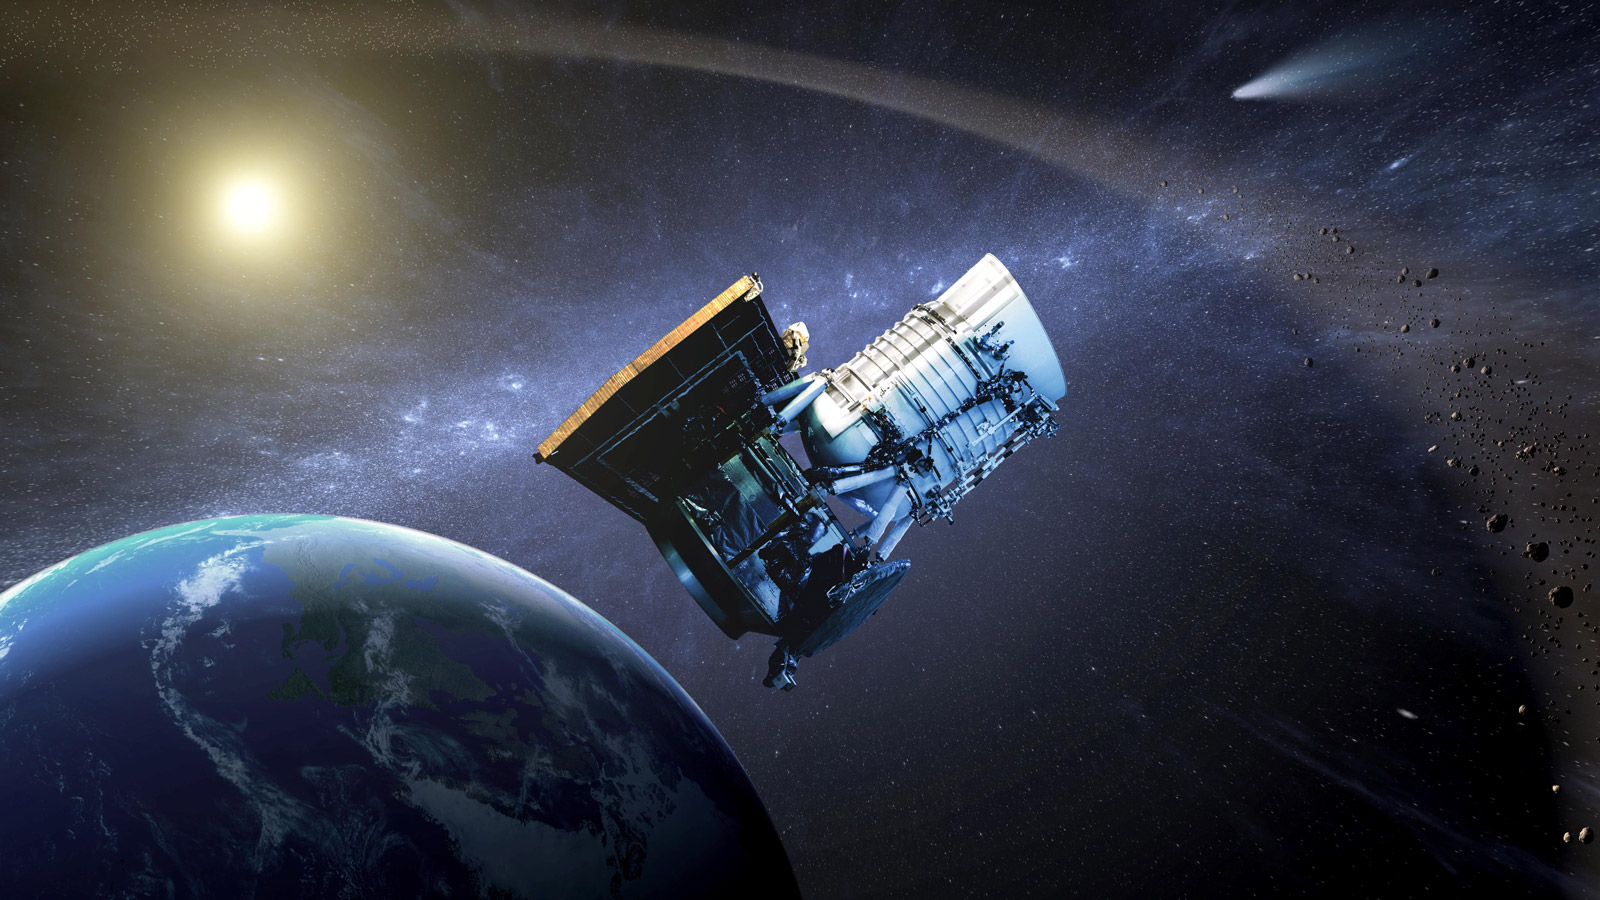 This artist's concept shows the Wide-field Infrared Survey Explorer, or WISE, spacecraft